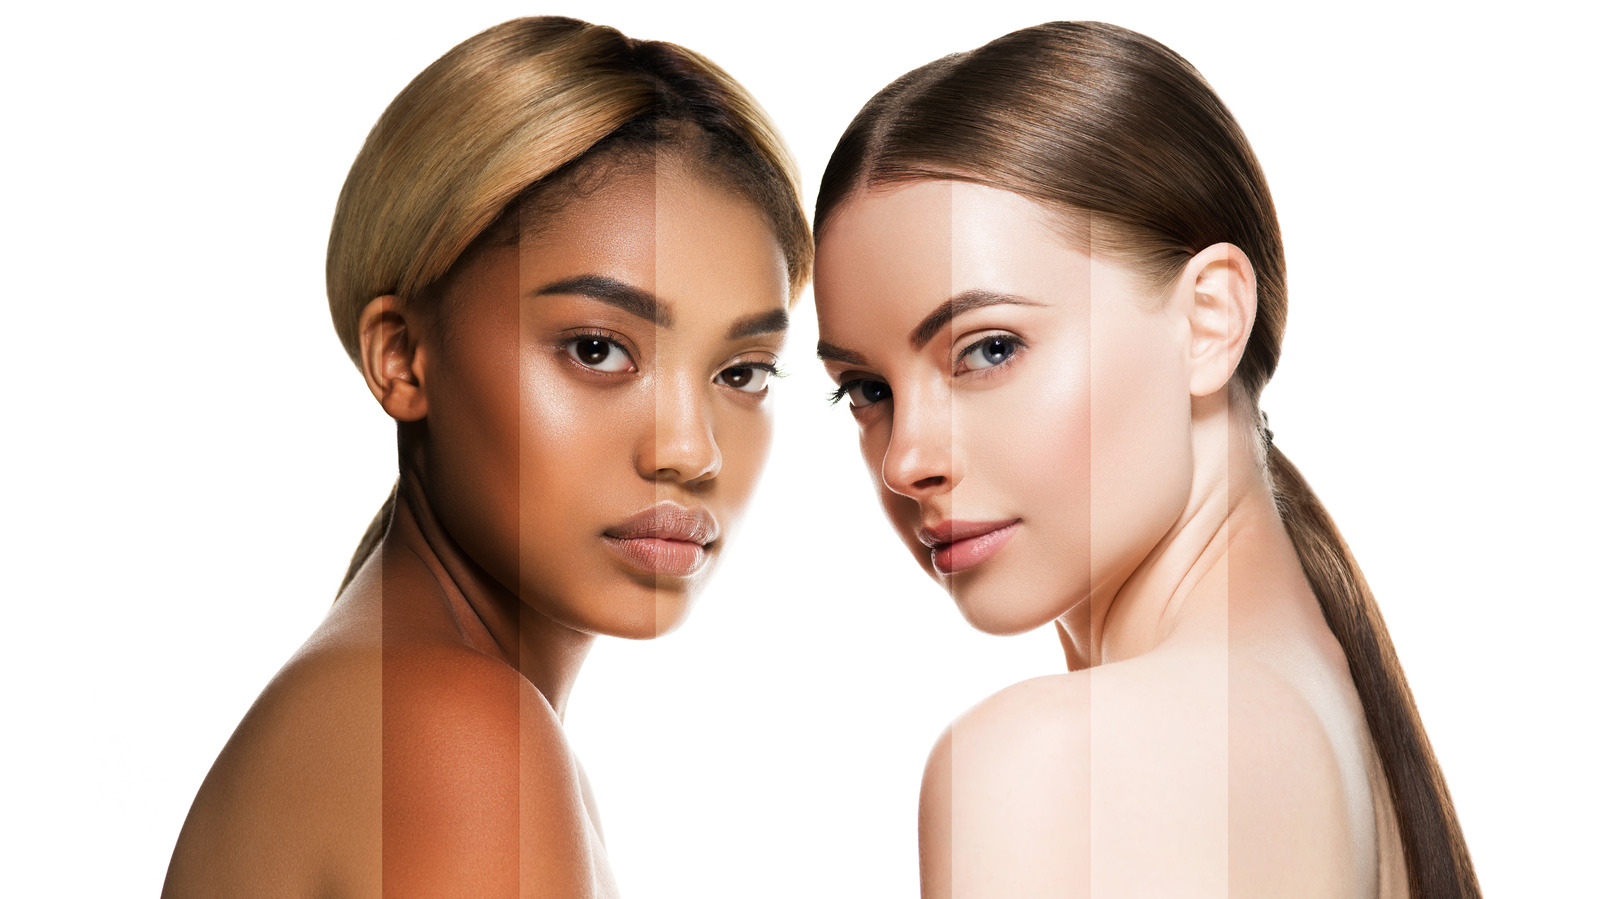 21 Makeup Brands With The Widest Range Of Foundation Shades